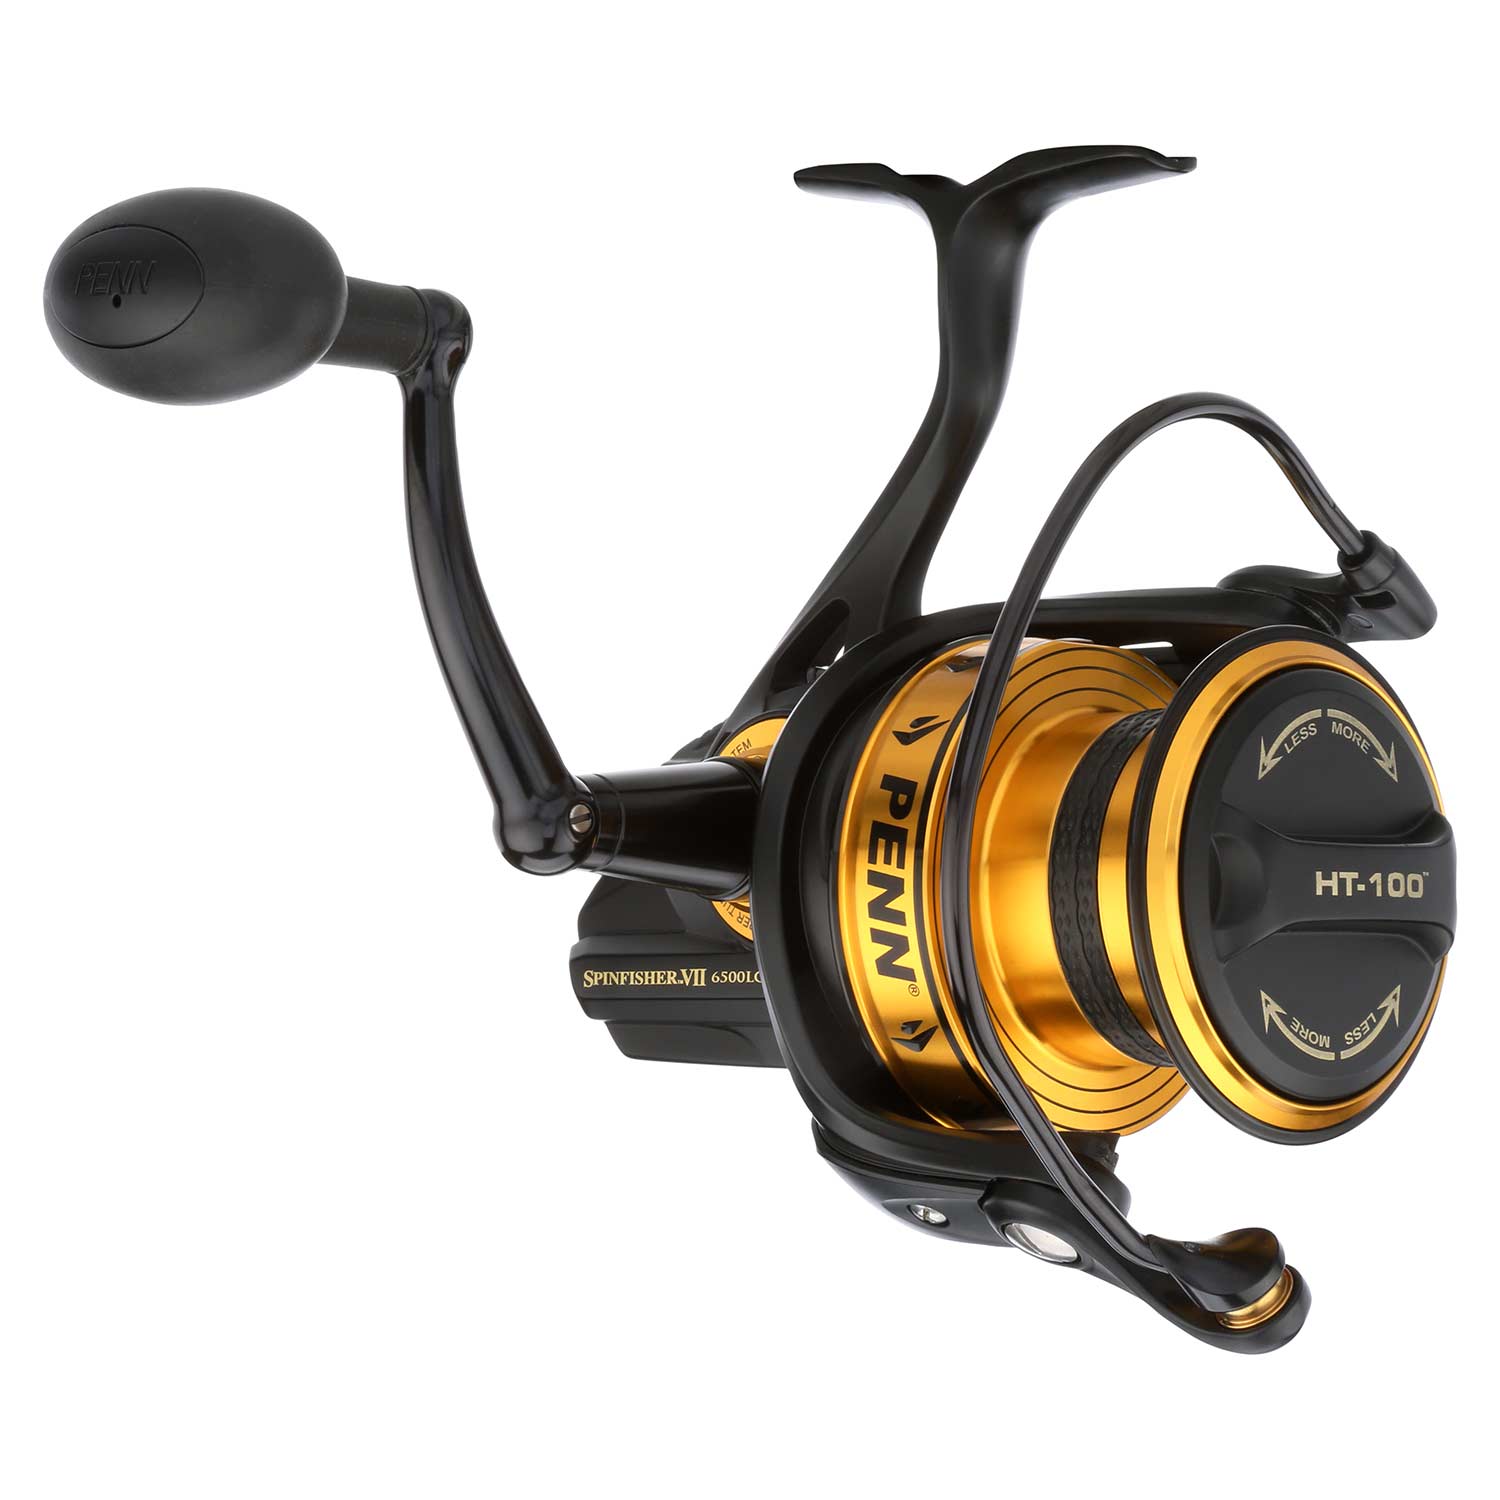 PENN Spinfisher VI Combo - 5500 – Crook and Crook Fishing, Electronics, and  Marine Supplies